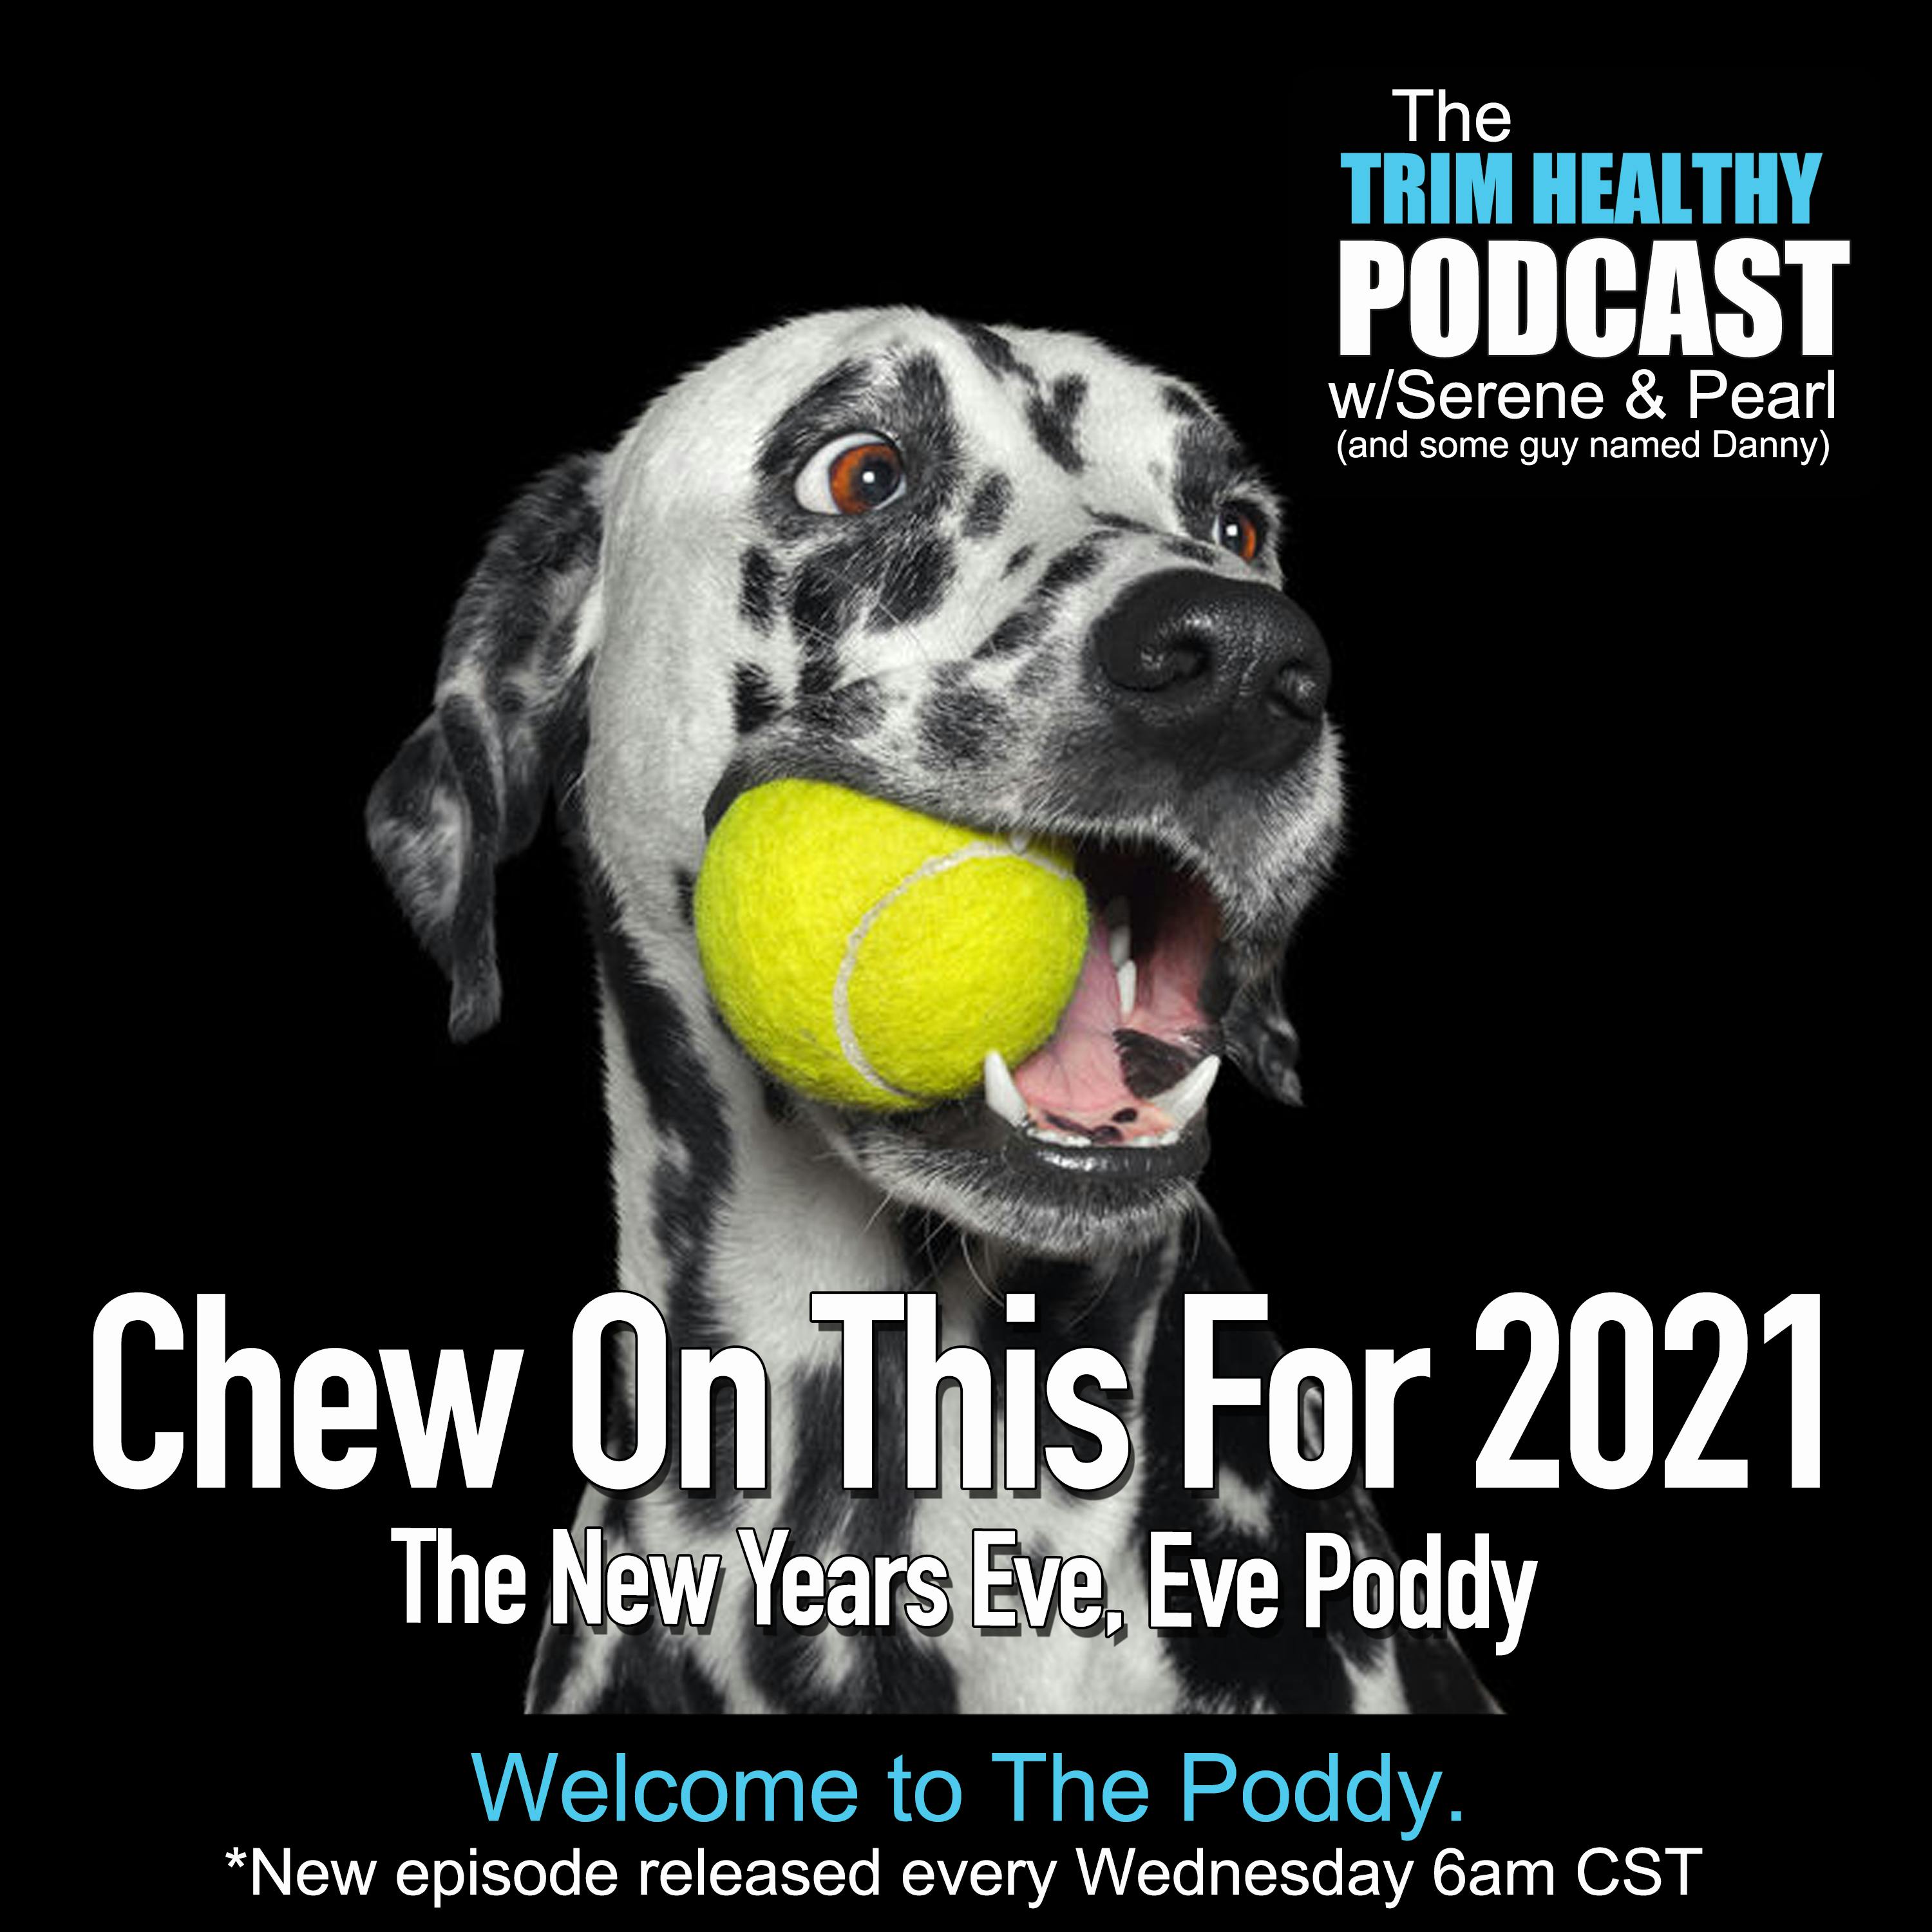 Ep 205: Chew On This For 2021 (the New Year's Eve, Eve Poddy)